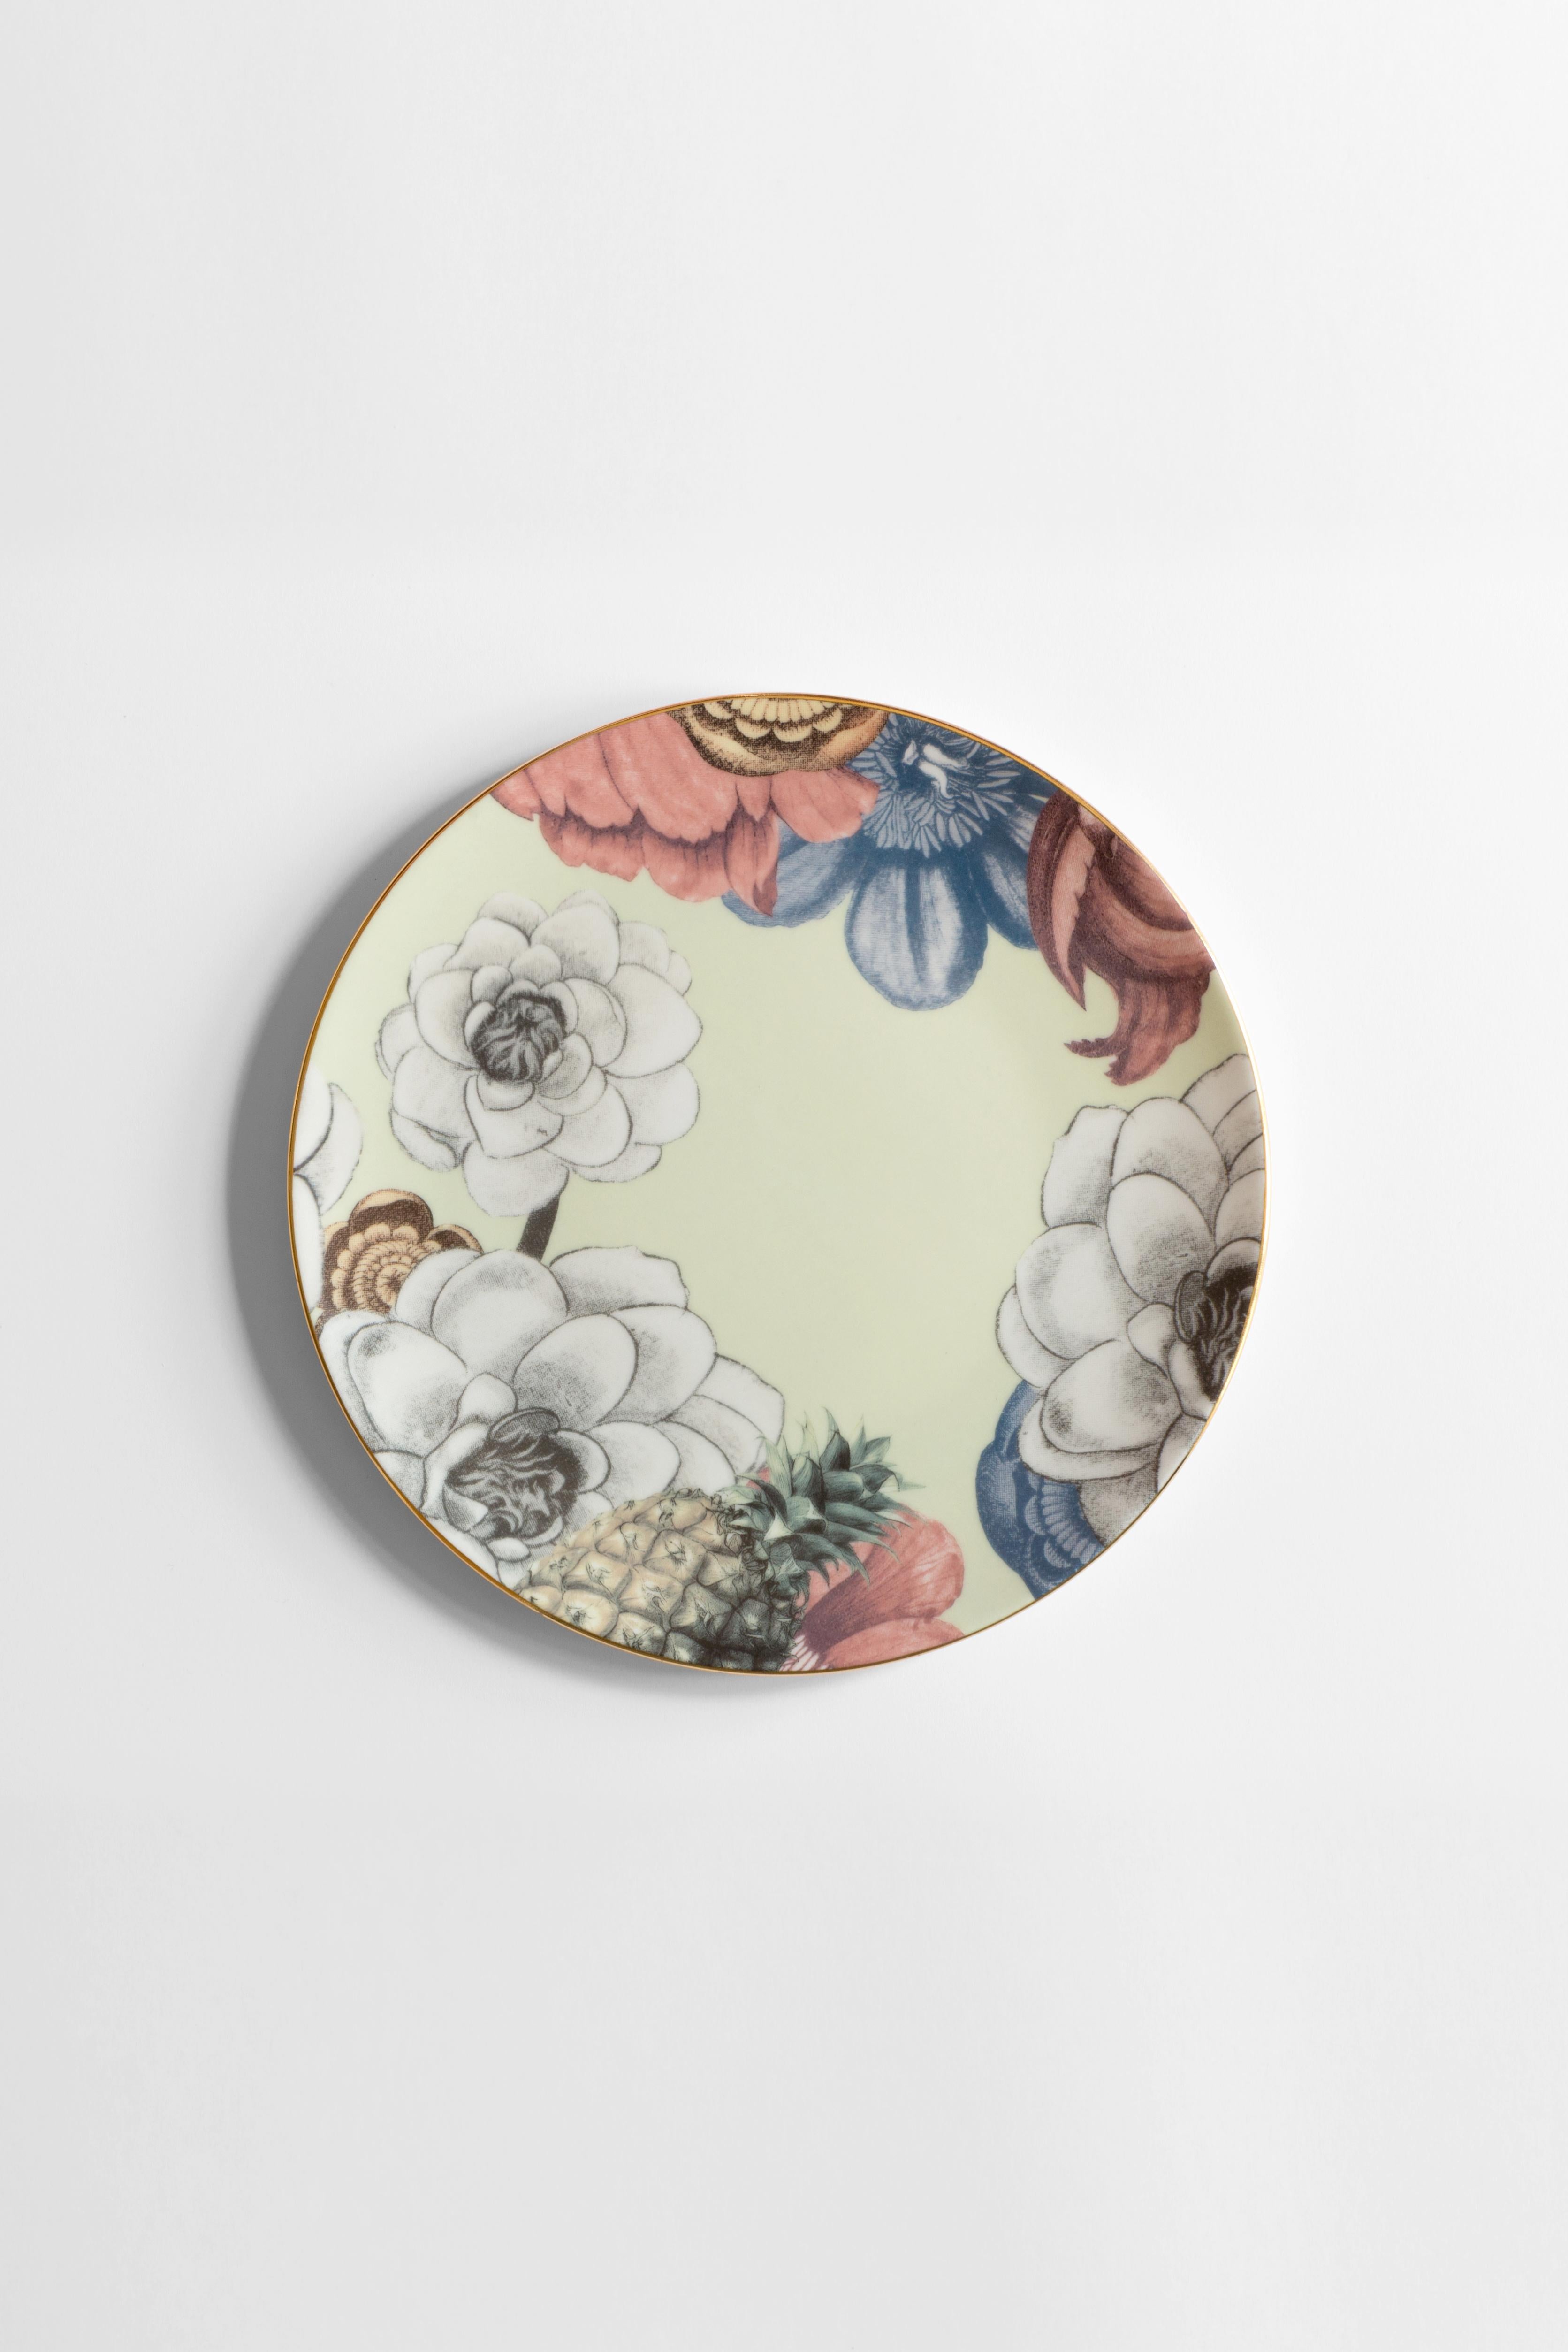 Cairo, Six Contemporary Porcelain Dessert Plates with Decorative Design In New Condition For Sale In Milano, Lombardia